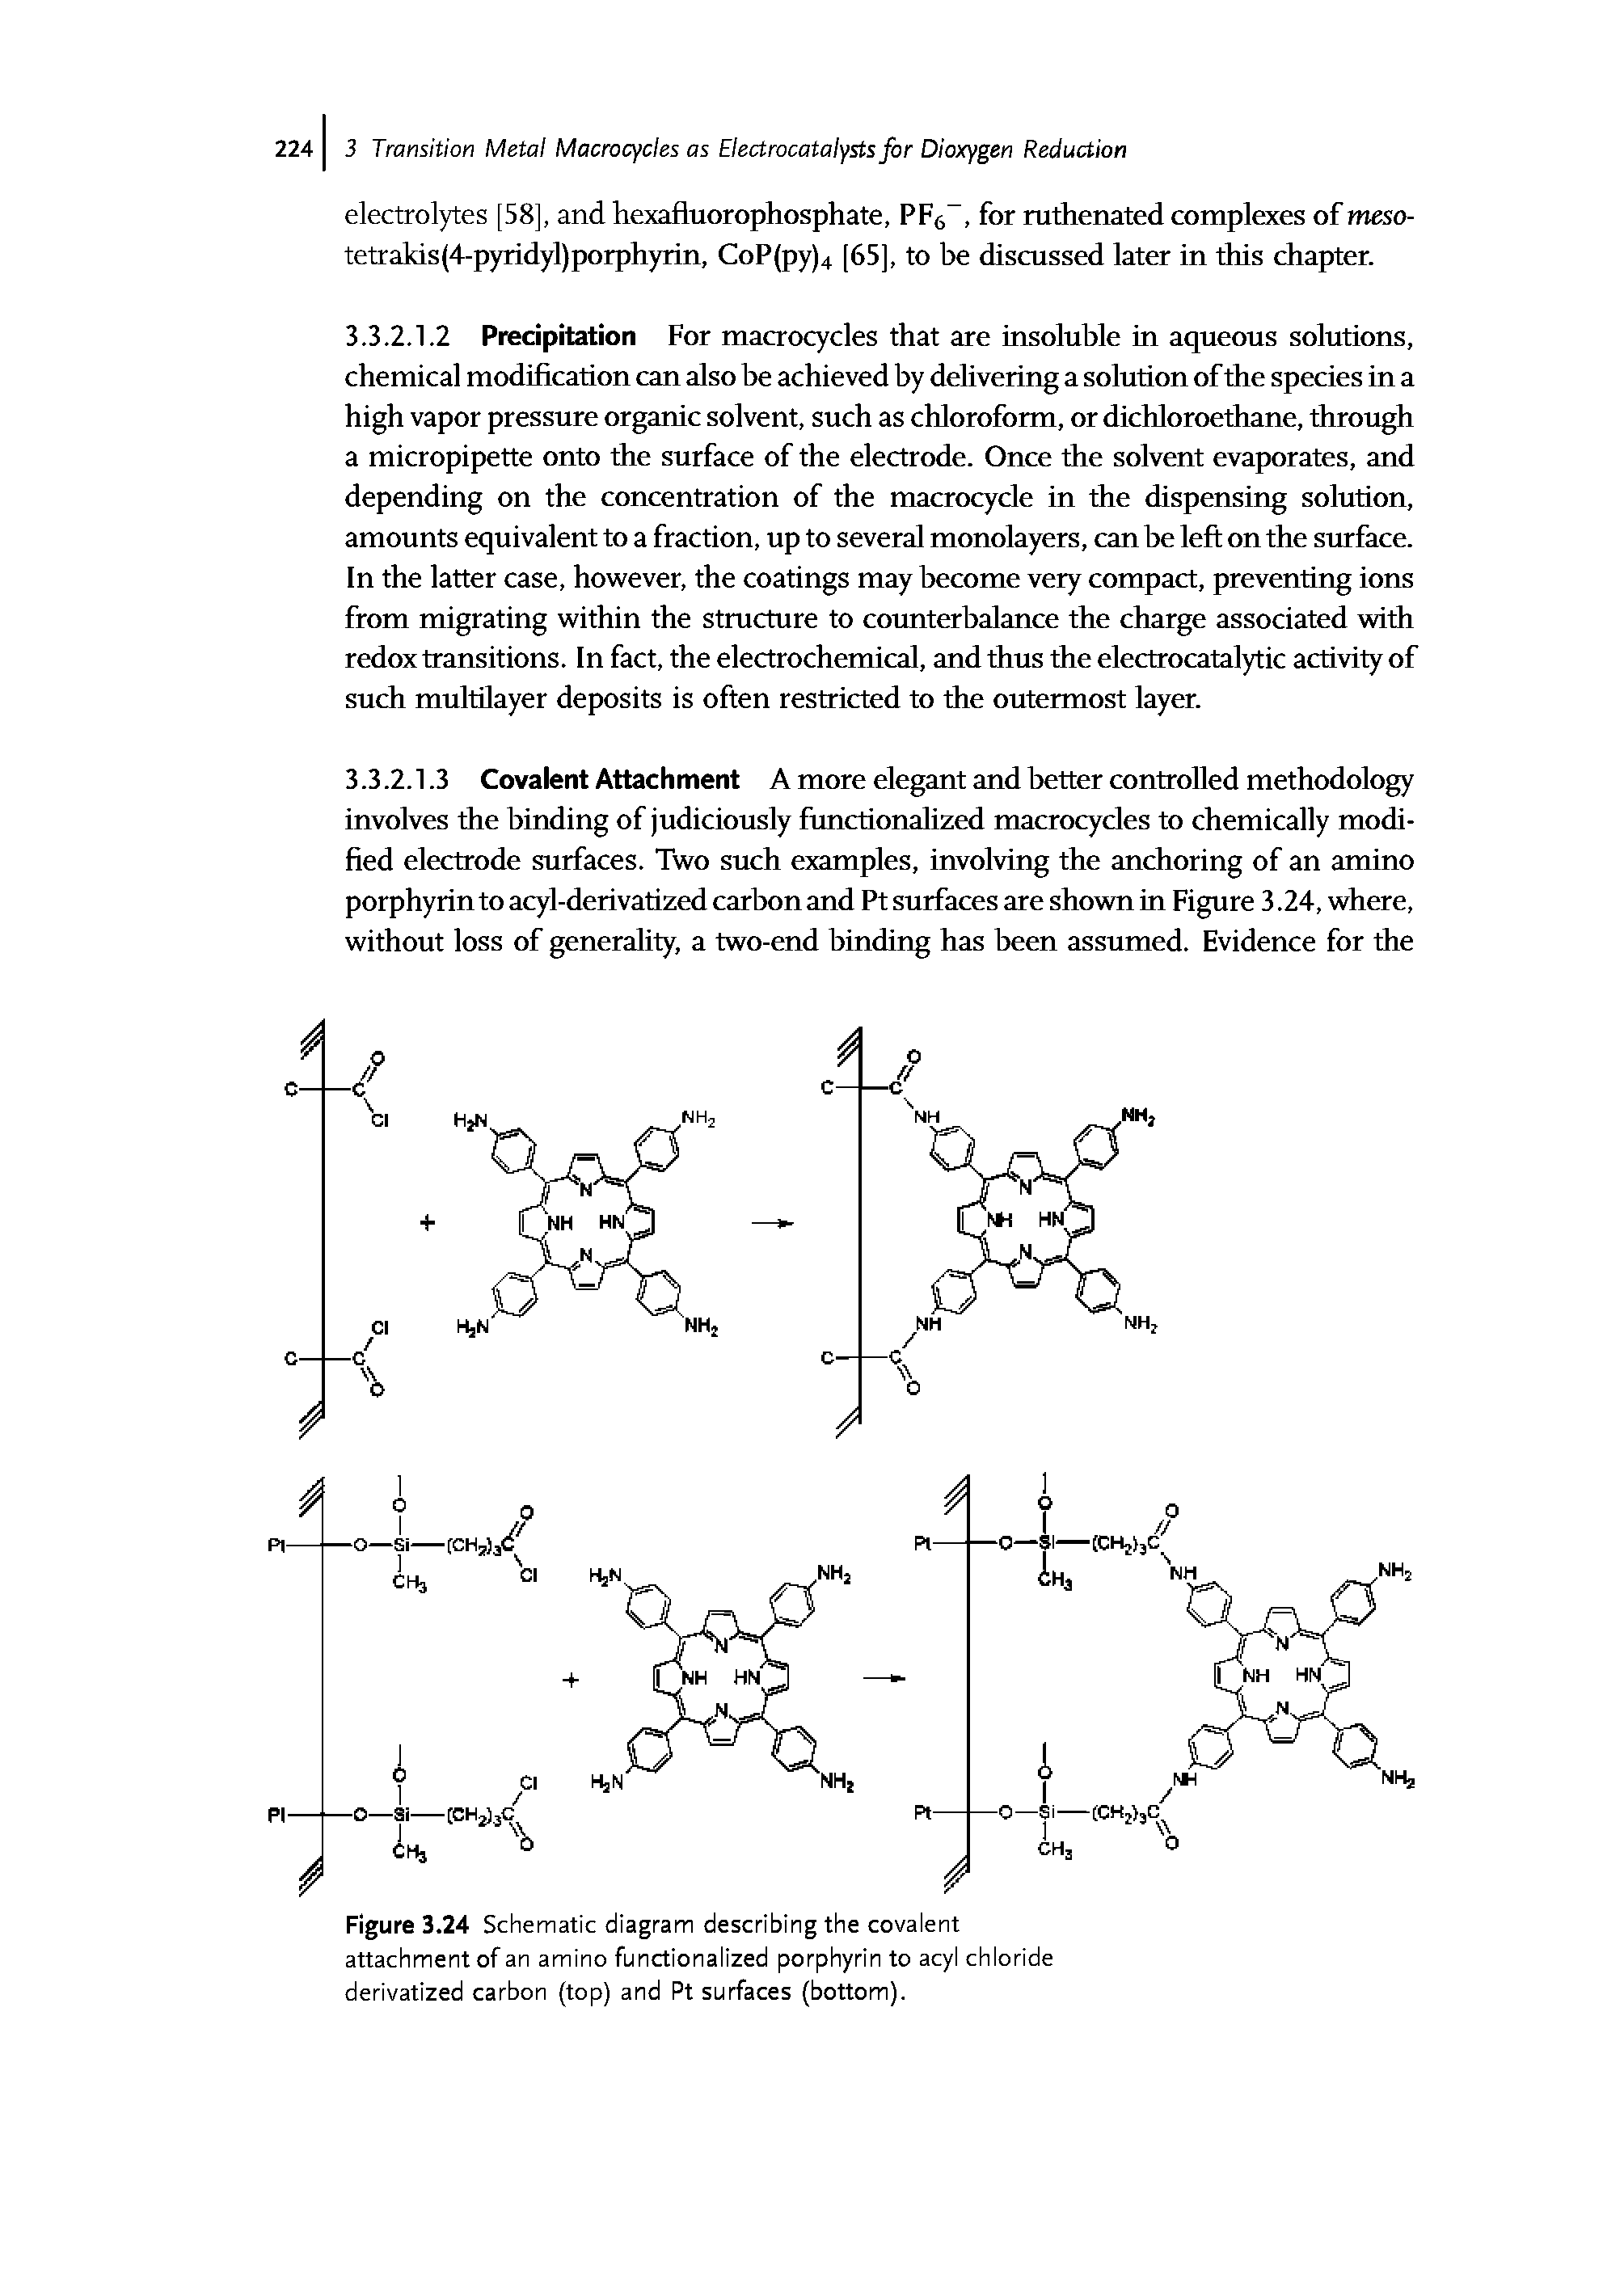 Figure 3.24 Schematic diagram describing the covalent attachment of an amino functionalized porphyrin to acyl chloride derivatized carbon (top) and Pt surfaces (bottom).